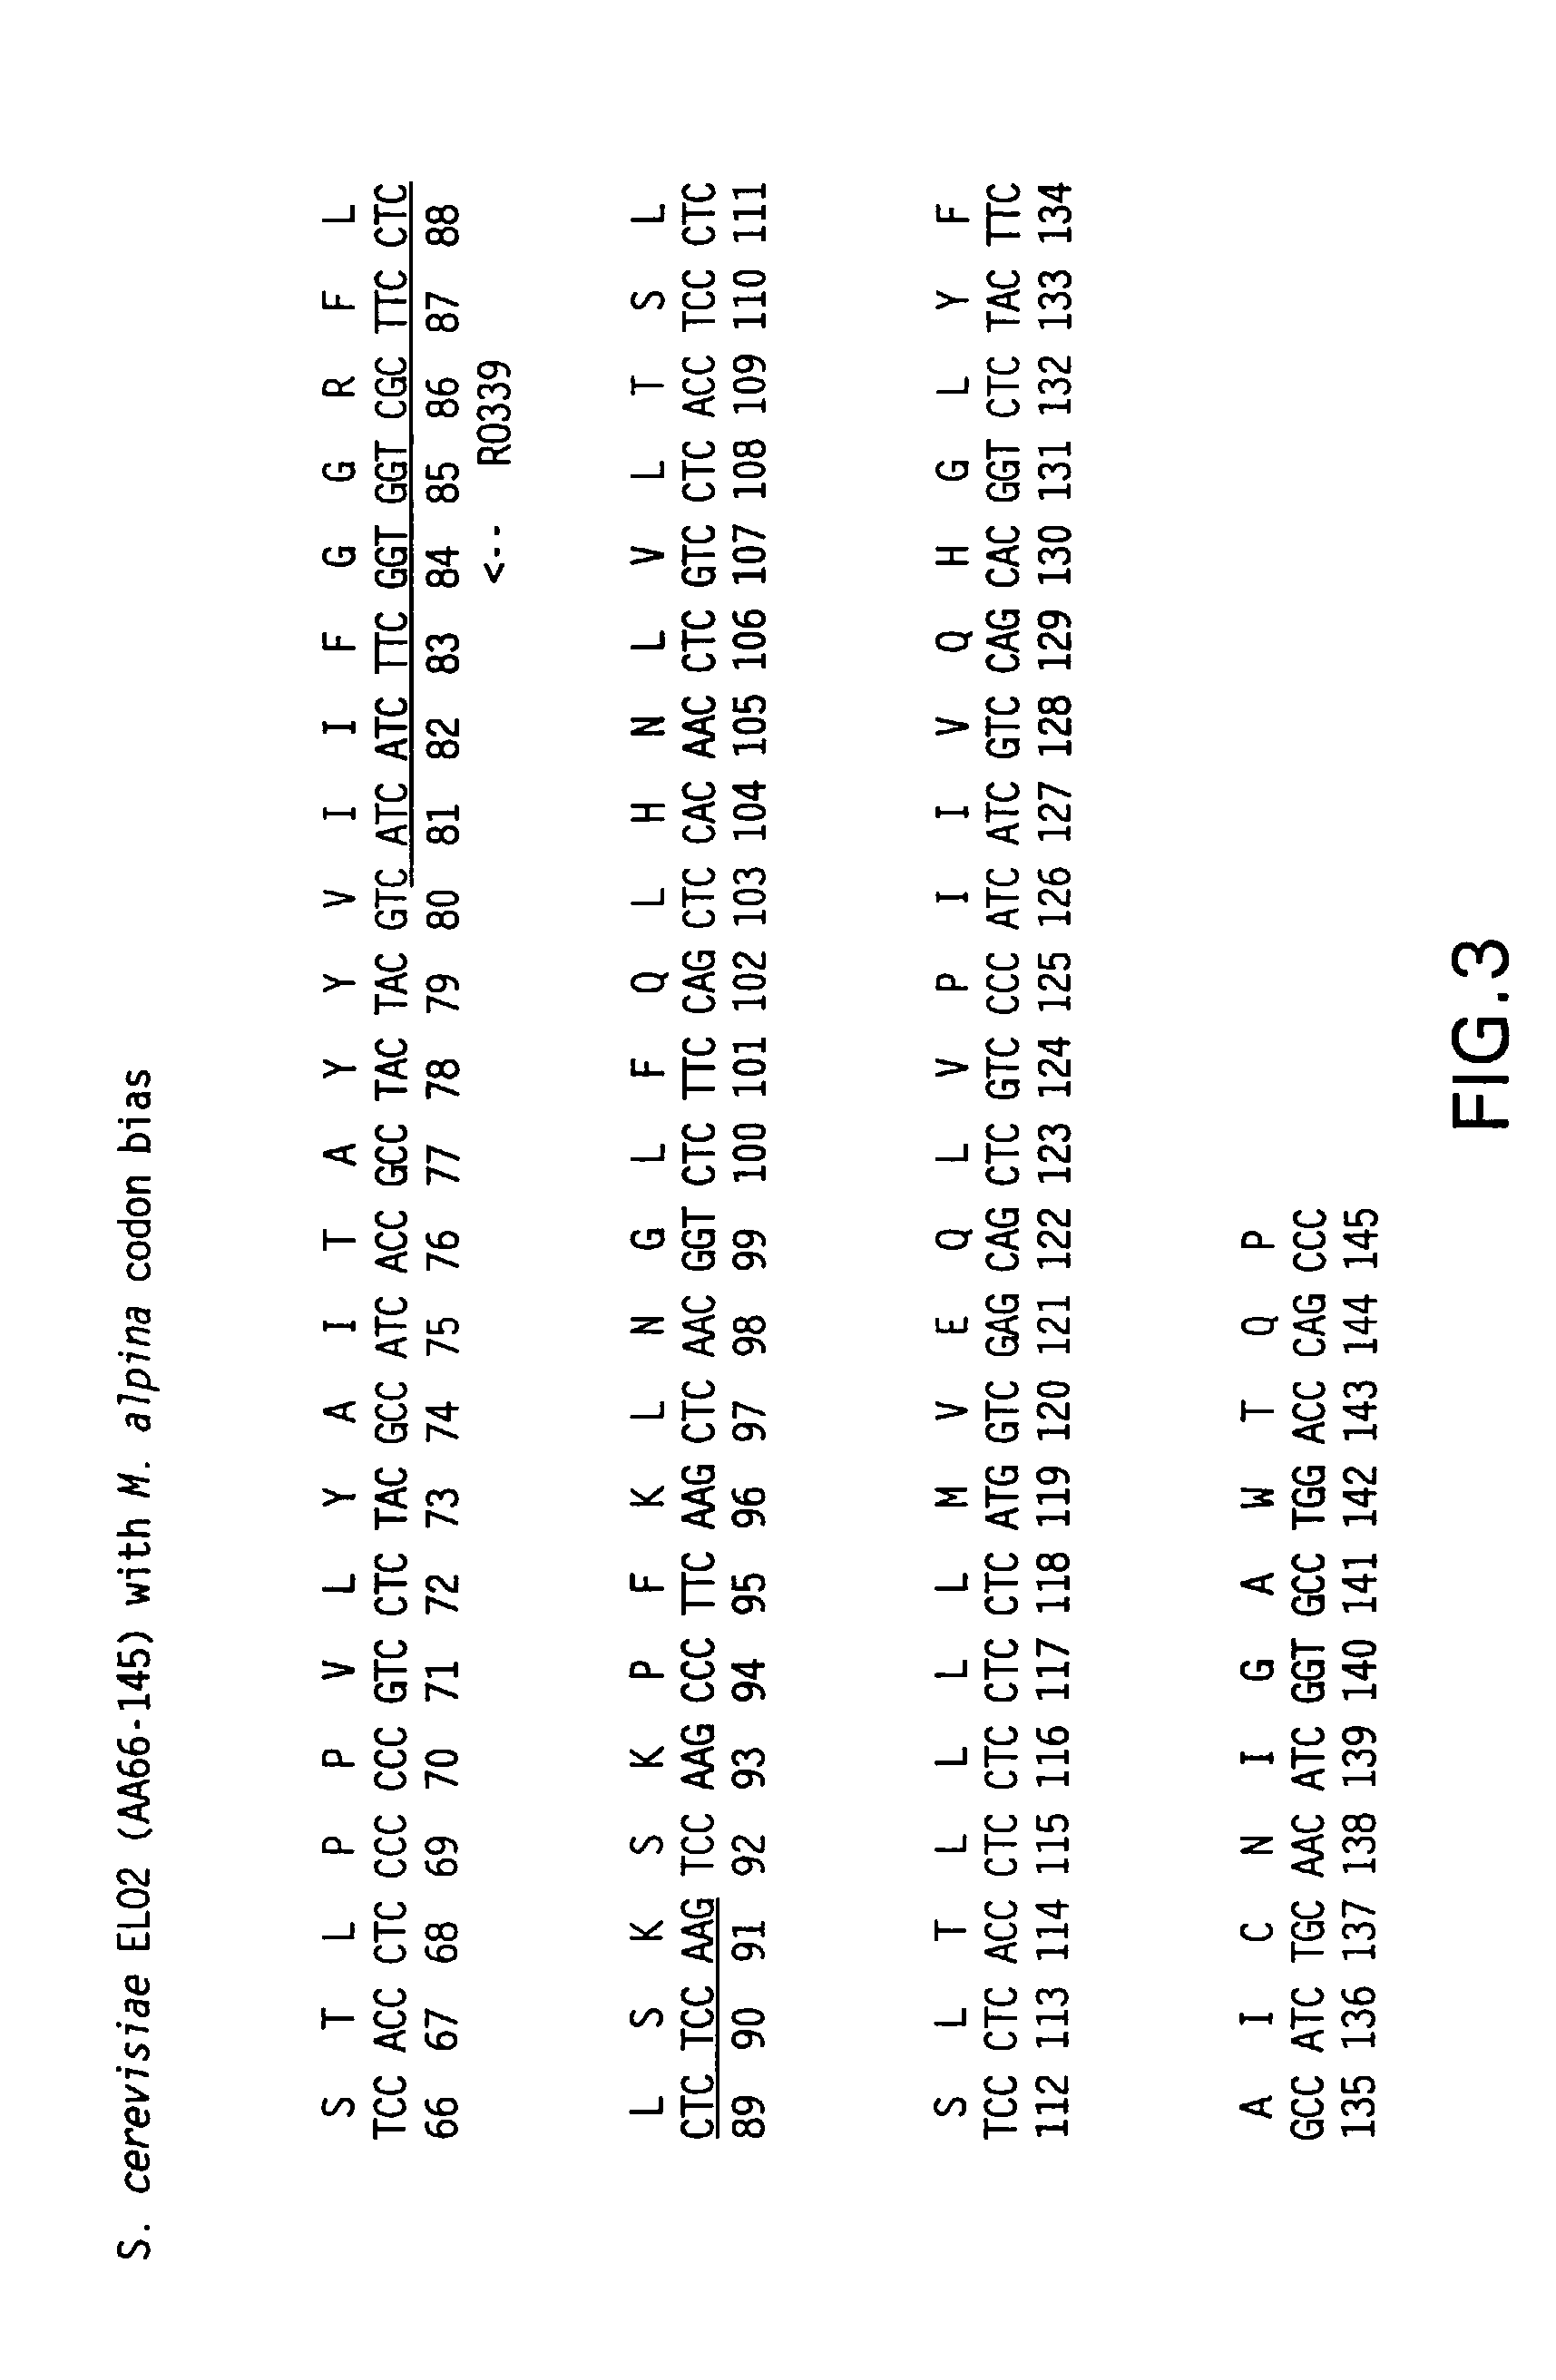 Elongase genes and uses thereof